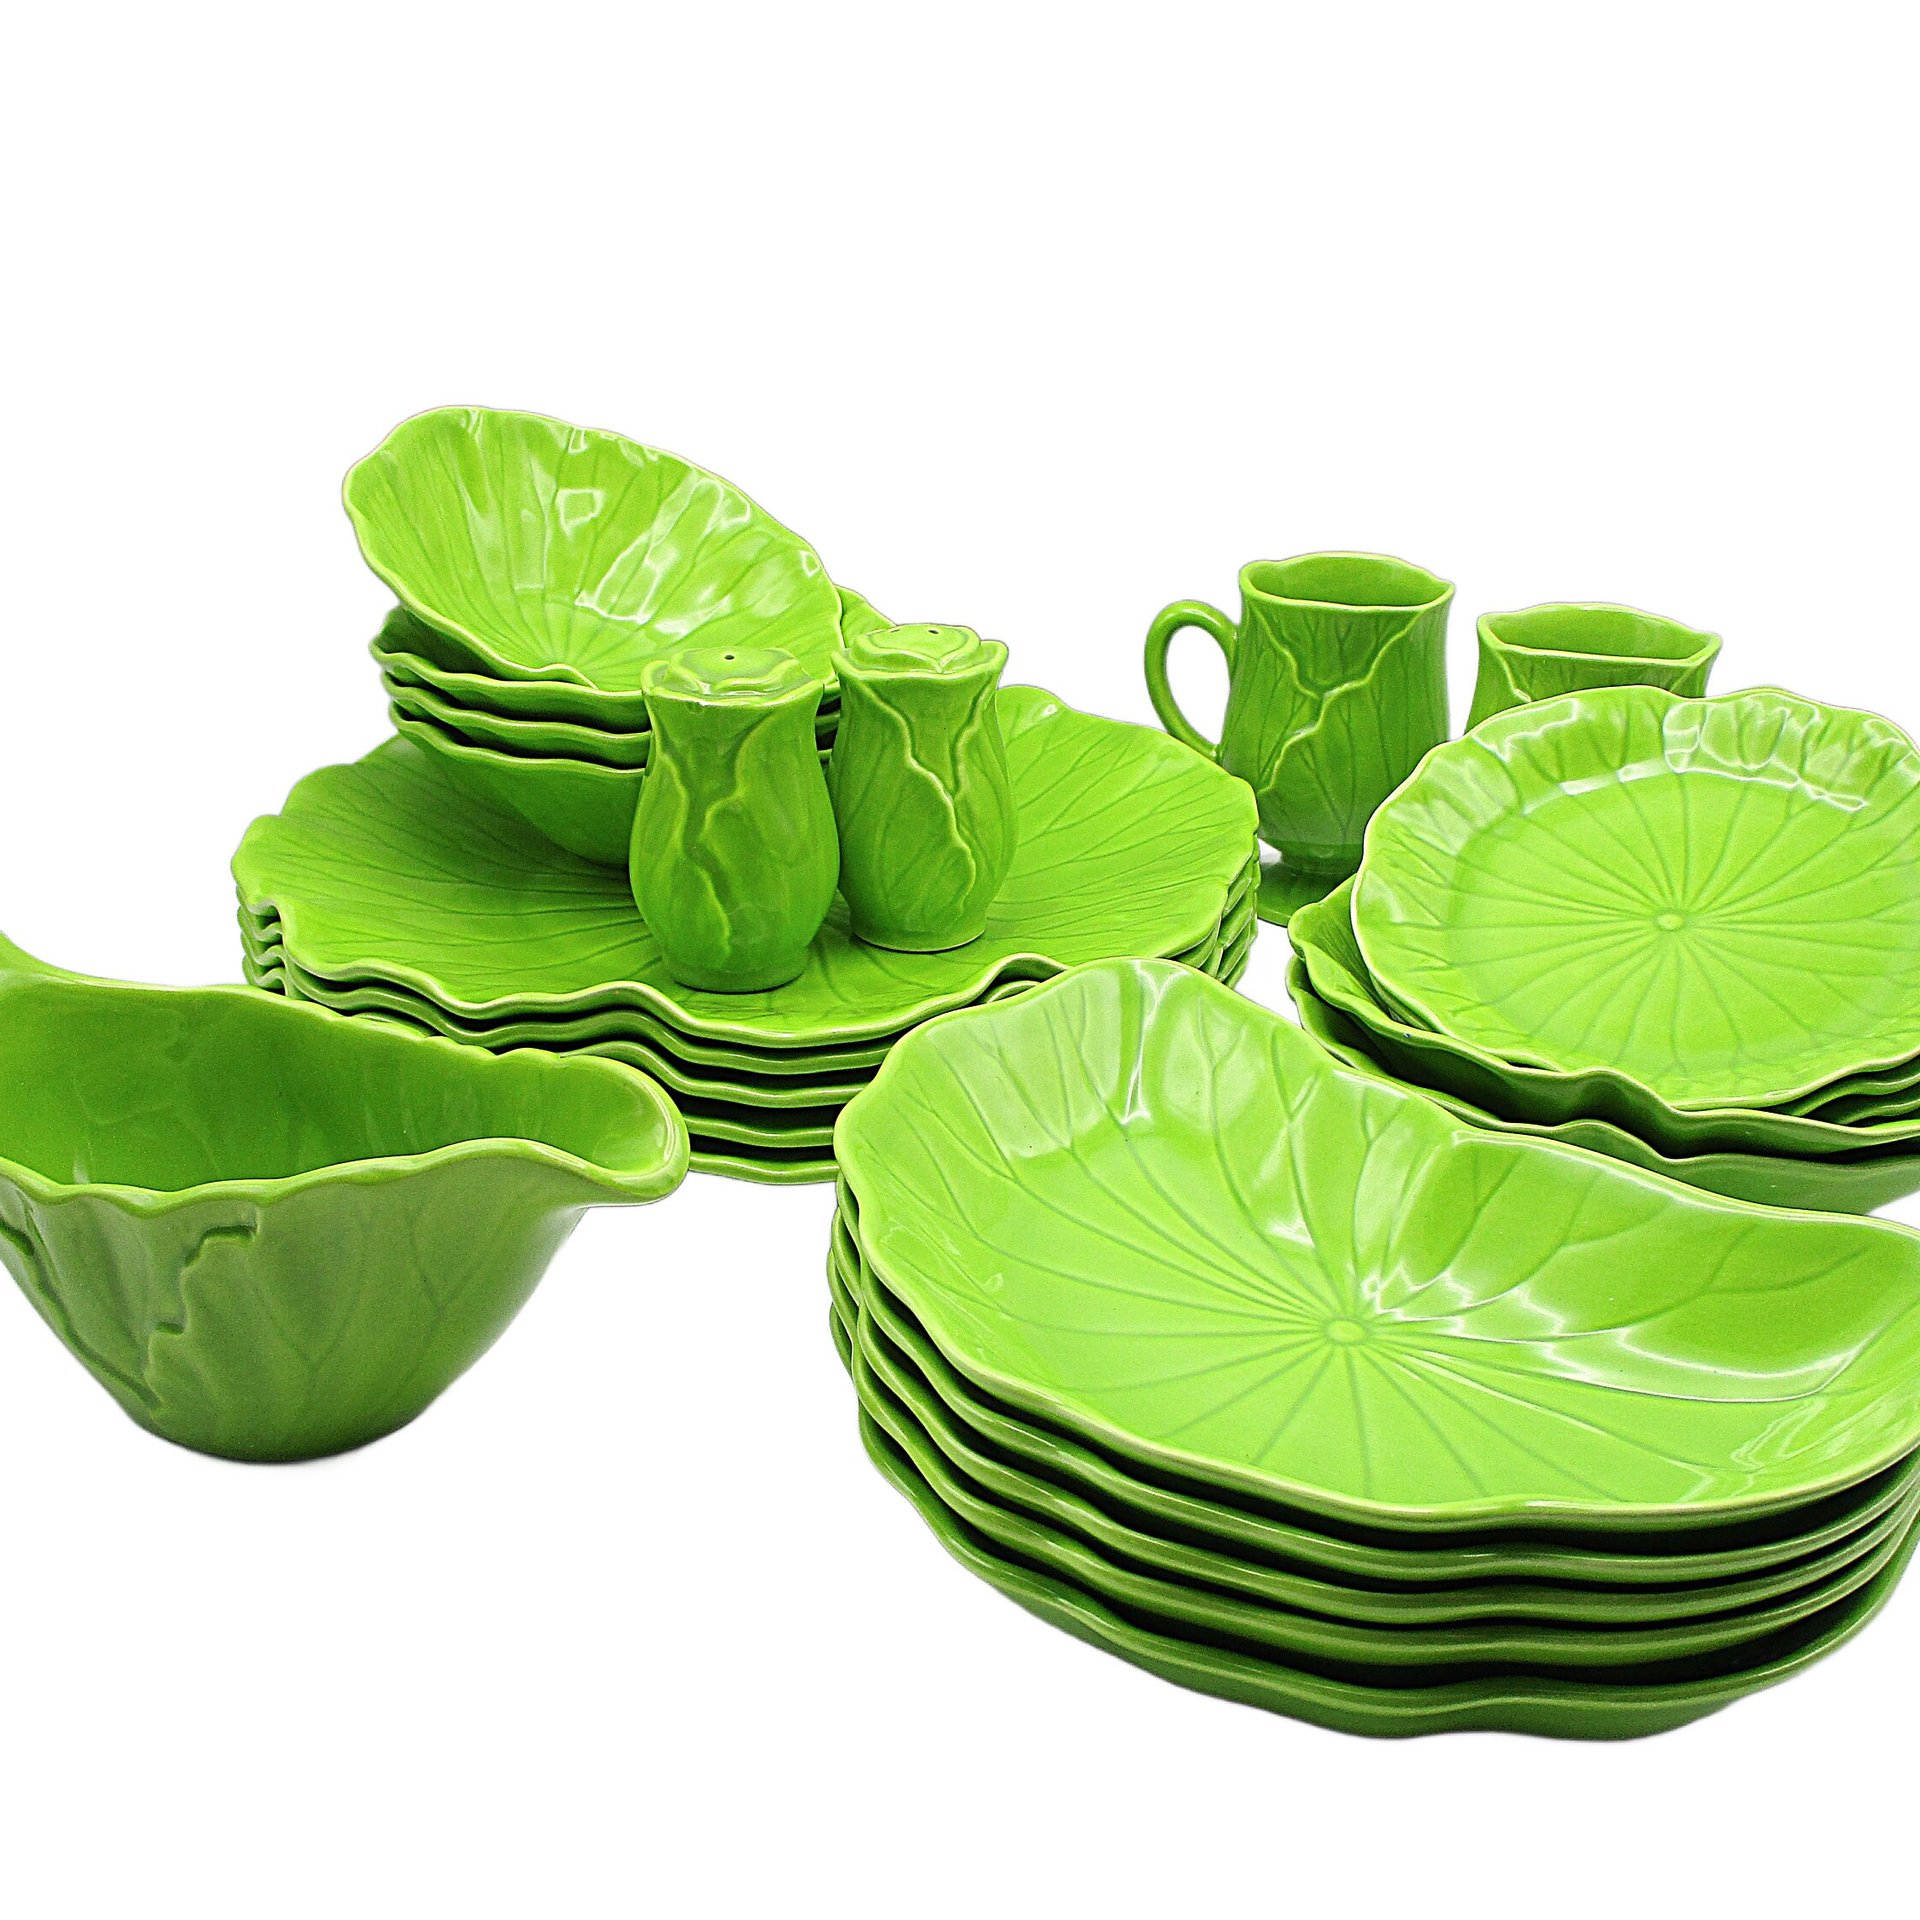 Metlox Lotus Bright Green Dinnerware, Your Choice, Crescents, Bread Salad and Dinner Plates, Cereal and Side Bowls, Salt Pepper, Gravy, Mugs